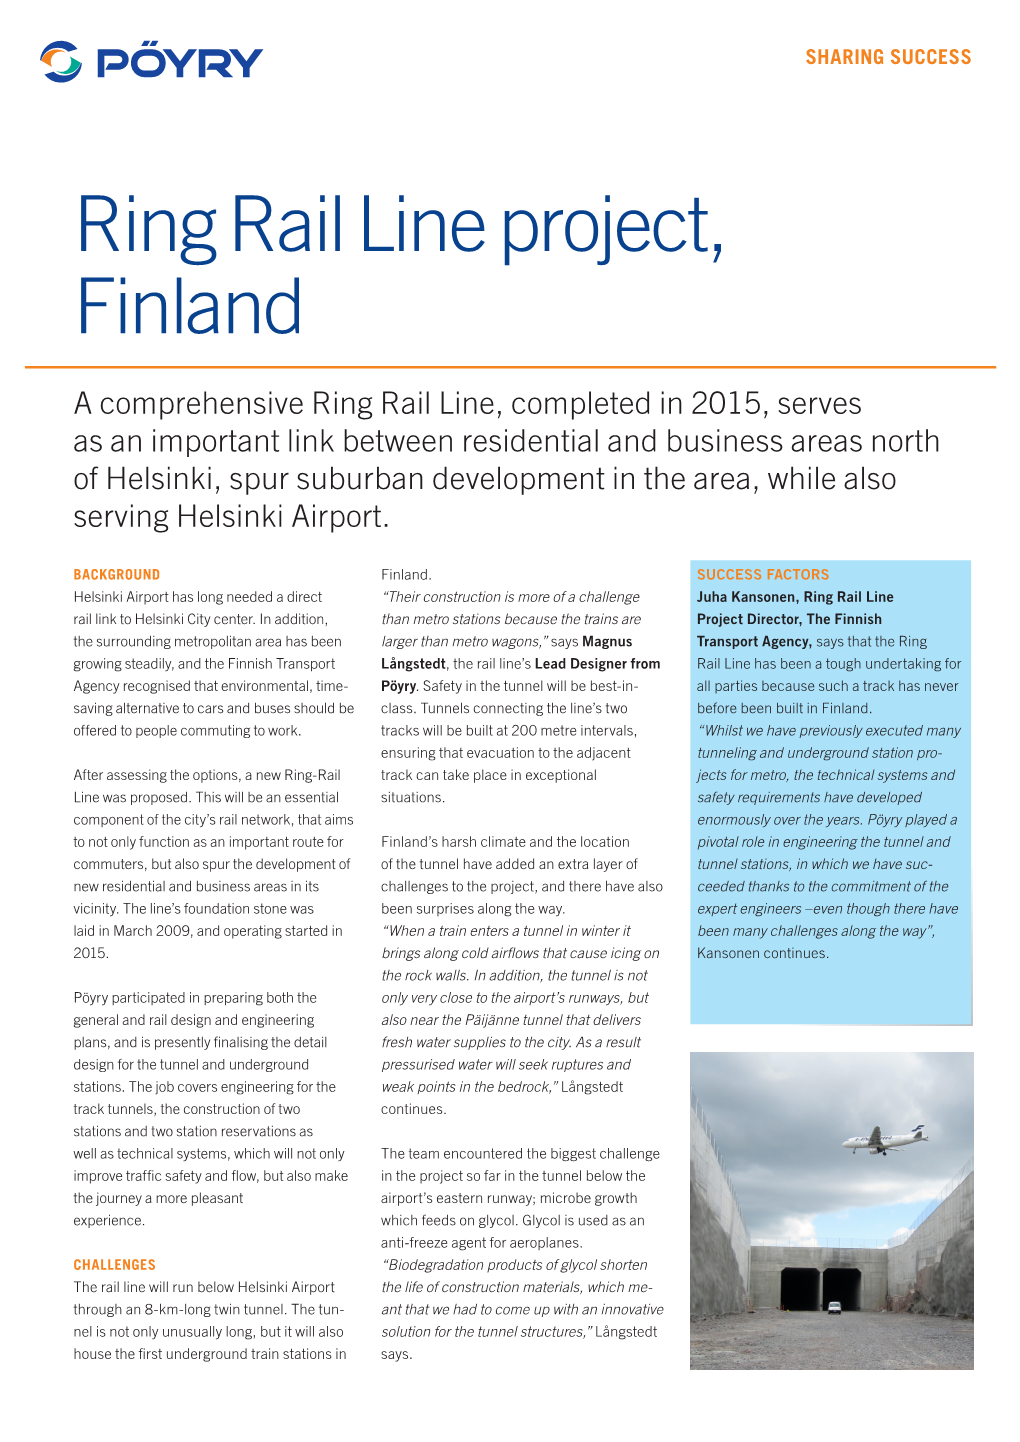 Ring Rail Line Project, Finland